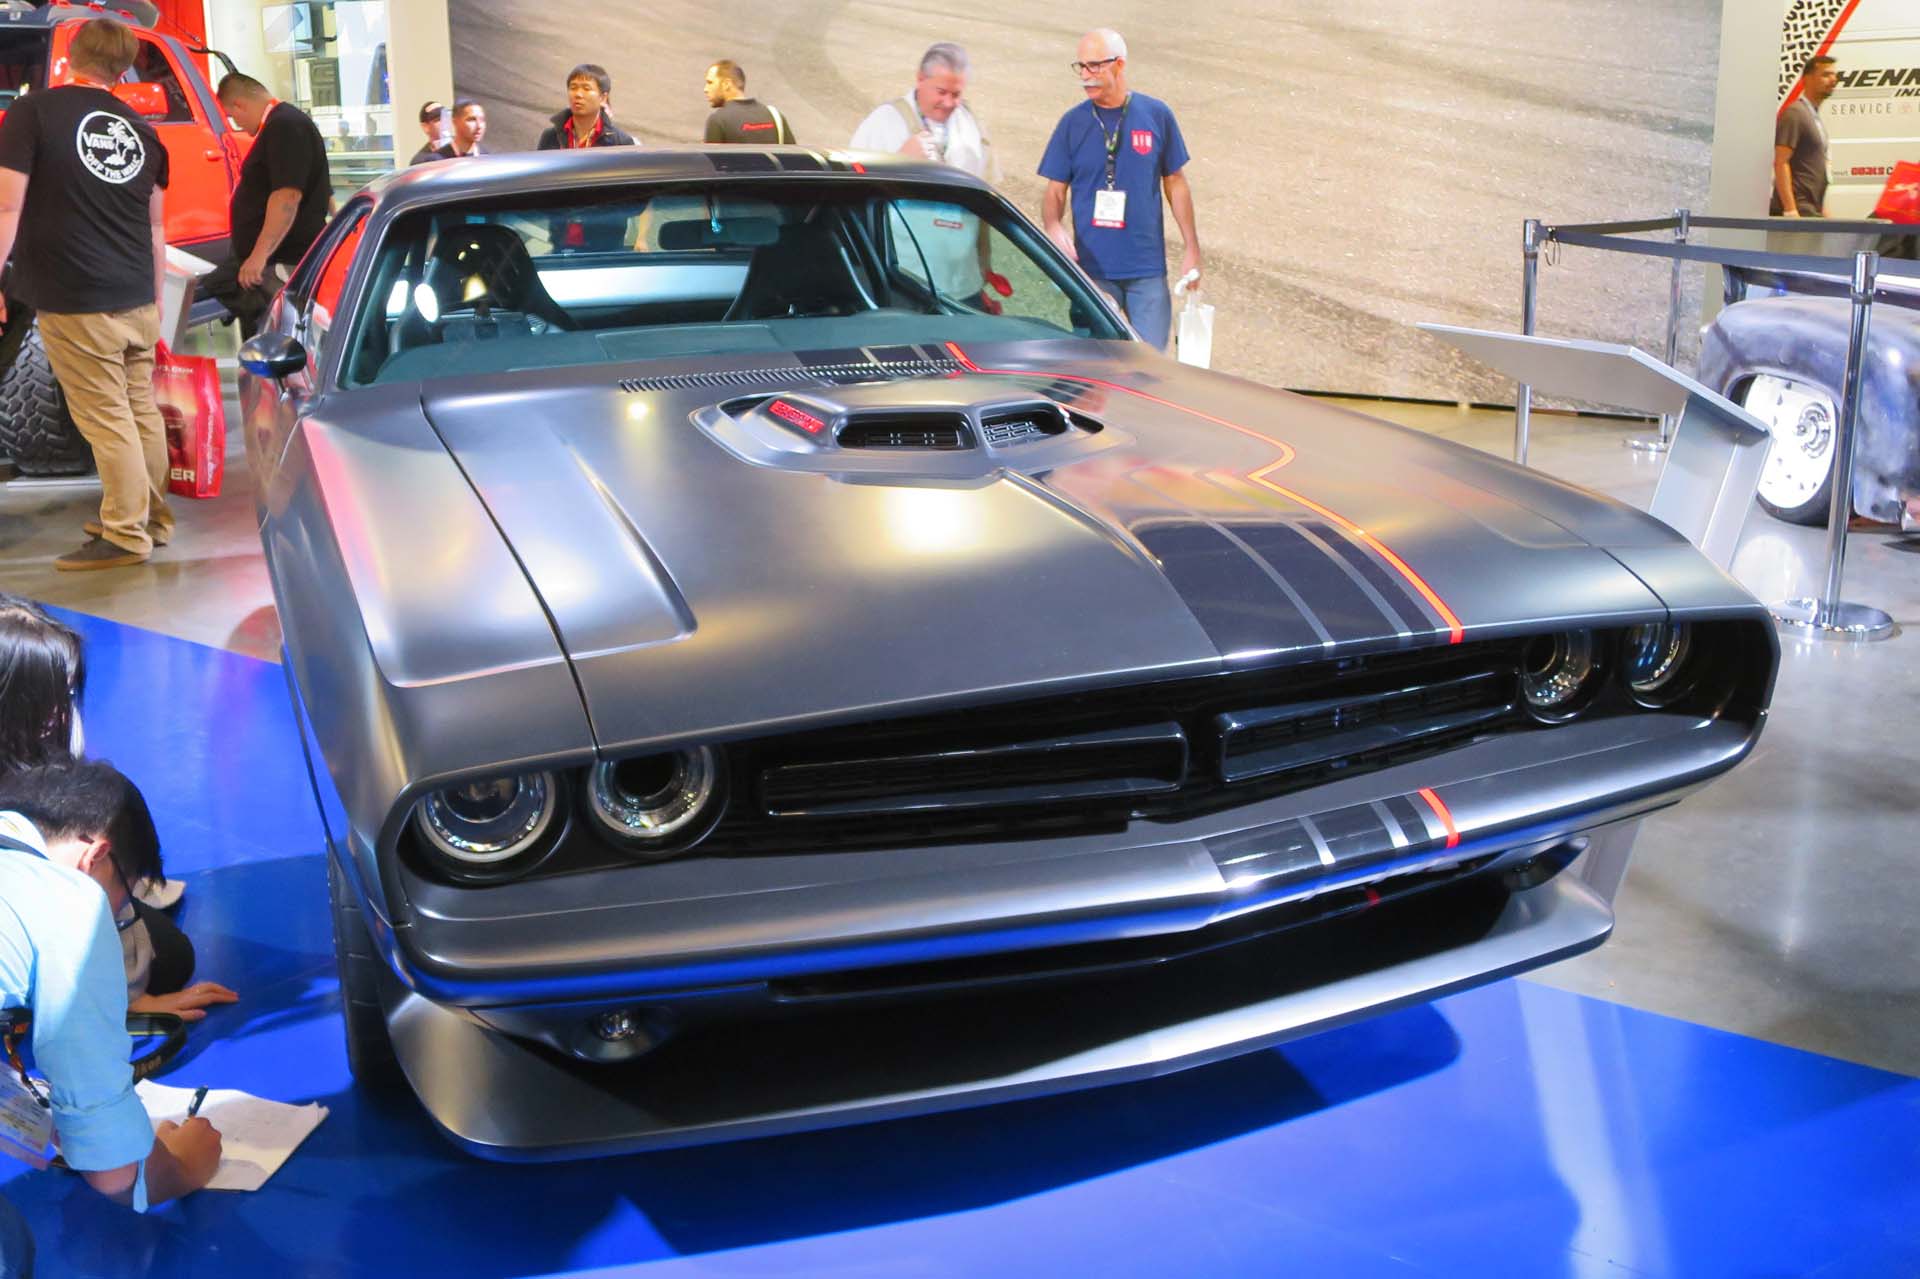 The Dodge Challenger Shakedown is a 1971 Challenger that includes a 392 Hemi crate engine making 485 horsepower, along with “Bitchin’ Black” exterior paint, concept SRT Hellcat wheels, and headlamps and taillights from a 2017 Challenger.